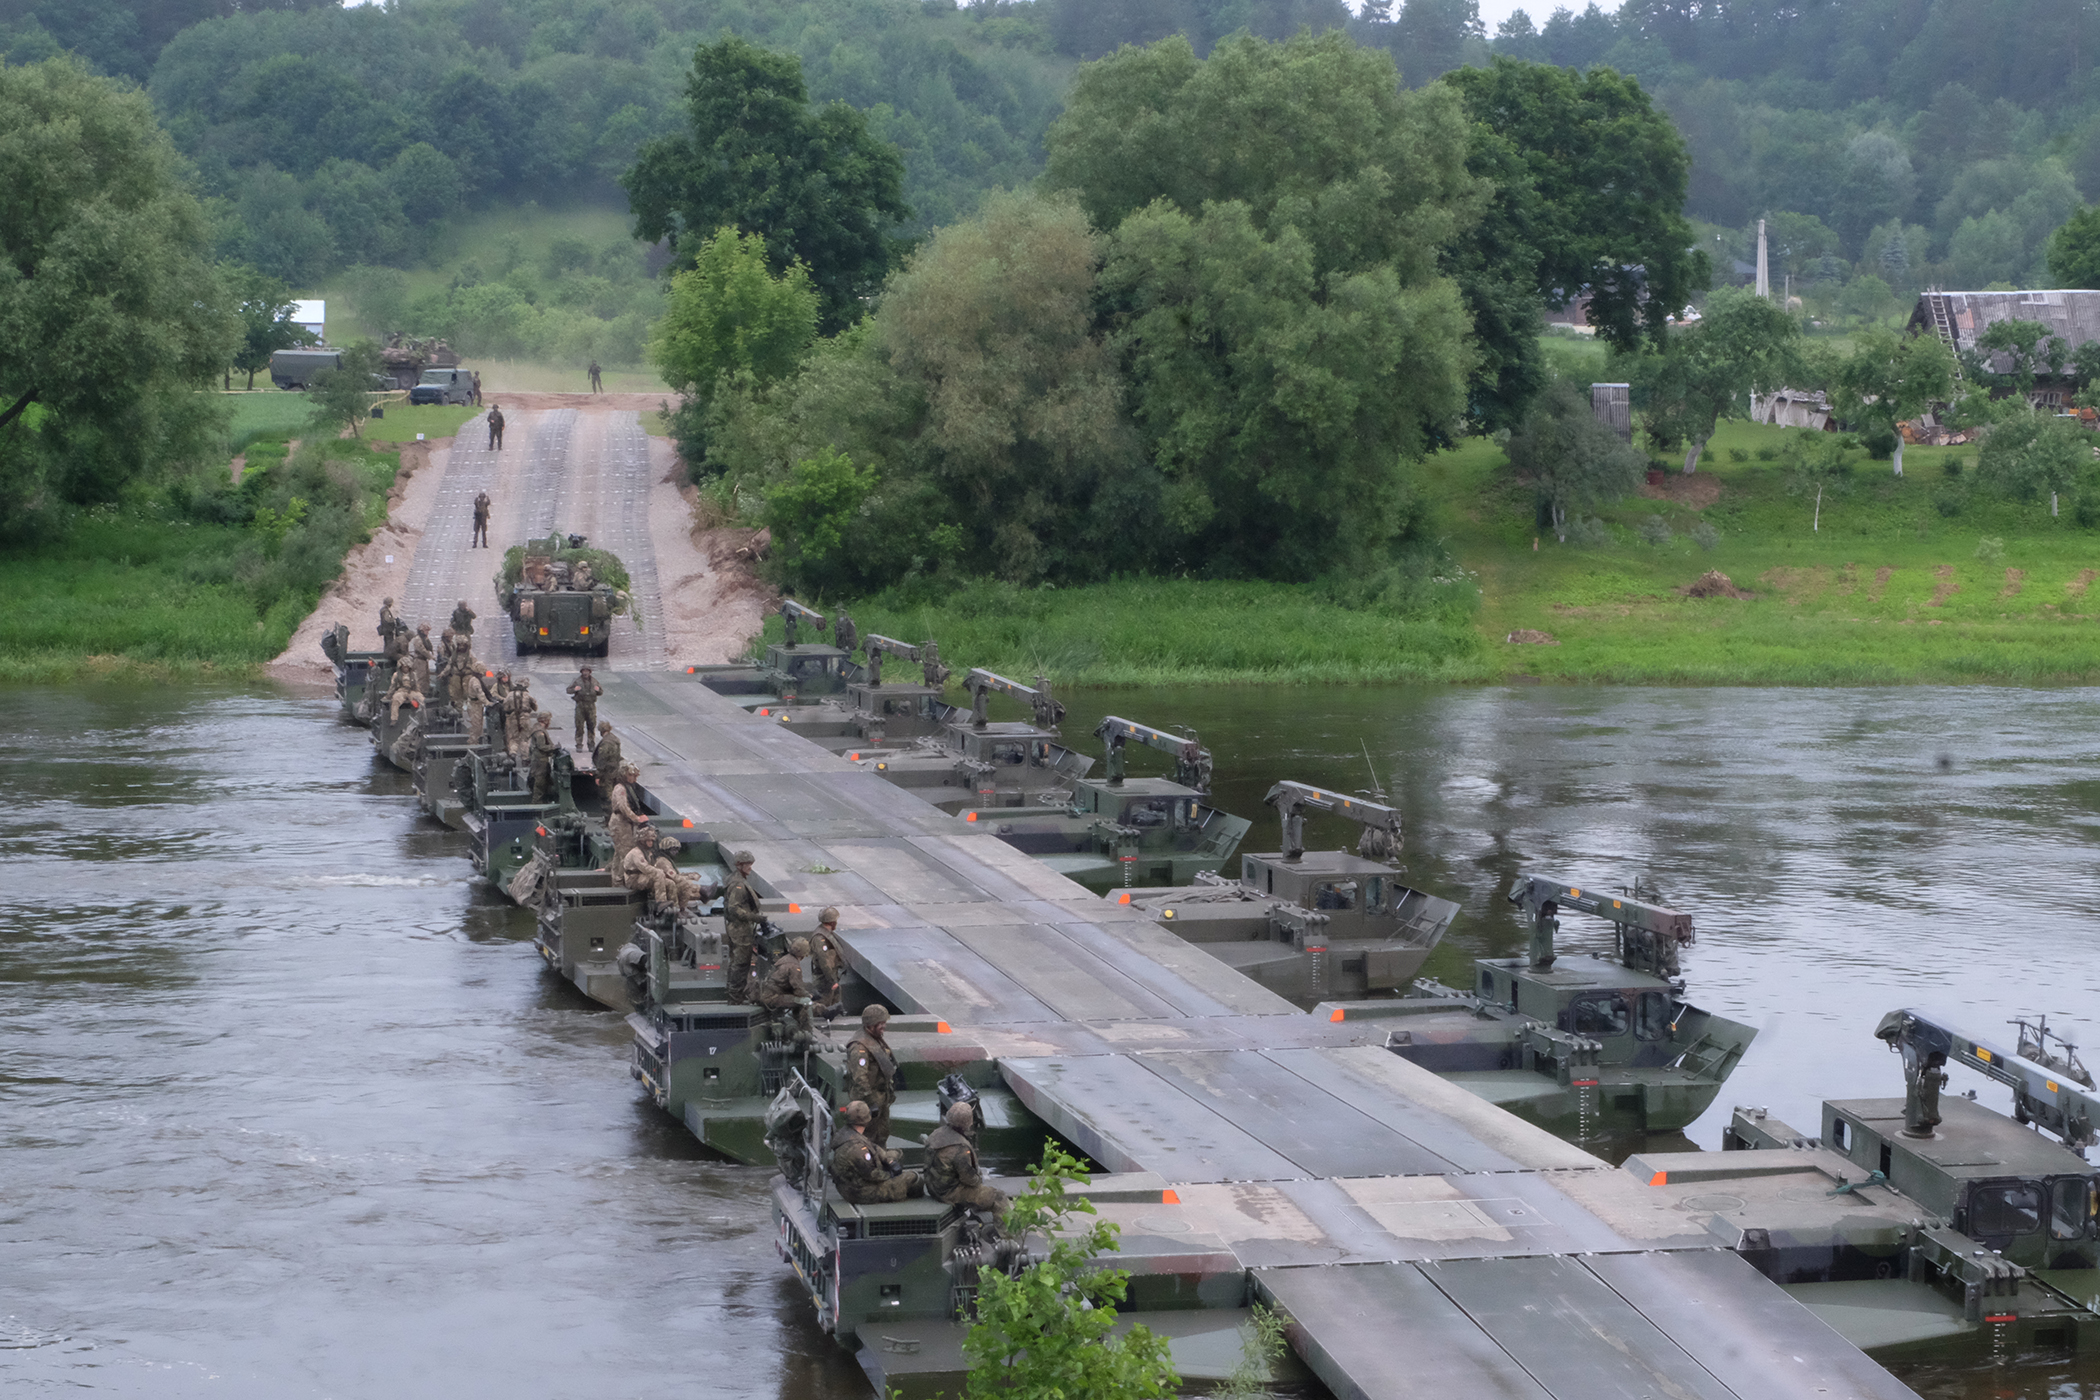 Battle Group Poland U.S., U.K and 15th Mechanized Brigade Polish tactical vehicles perform river crossing training June 19 in Rukla, Lithuanian as part of the joint training exercise Iron Wolf which is held in conjunction with Saber Strike 17. The exercises include integrated and synchronized deterrence-oriented training designed to improve interoperability and readiness of the militaries of the 20 participating nations throughout the Baltic region and Poland. (U.S. Army photo by Spc. Kevin Wang/Released)